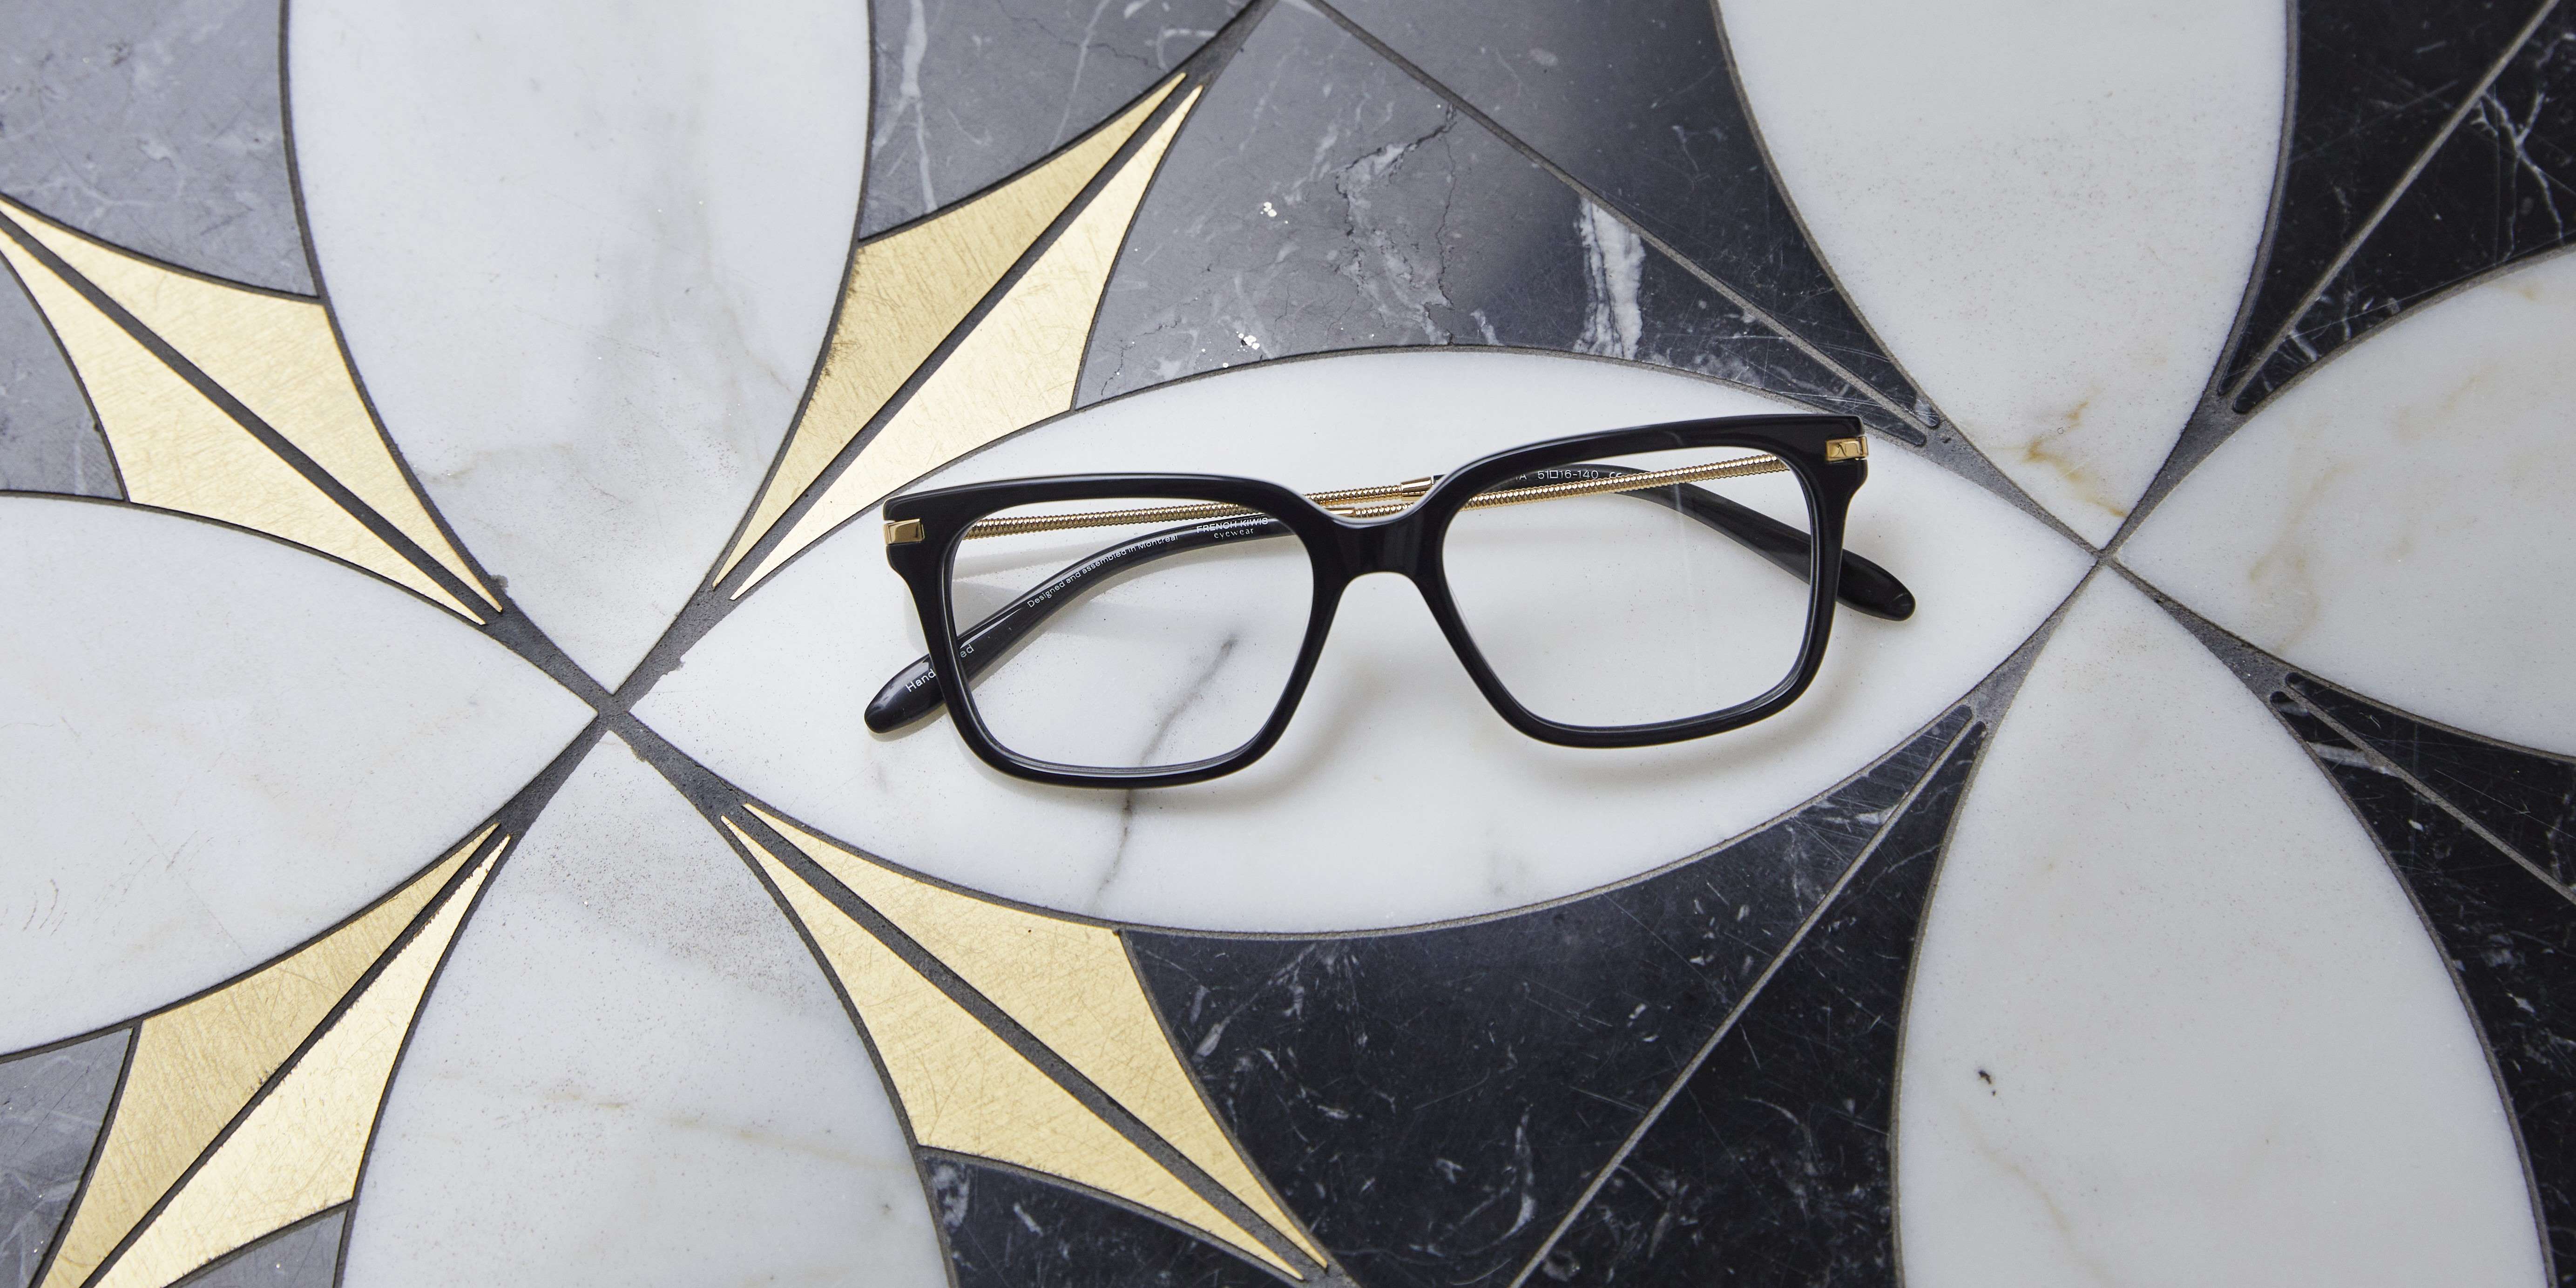 Photo Details of Sasha Black & Silver Reading Glasses in a room